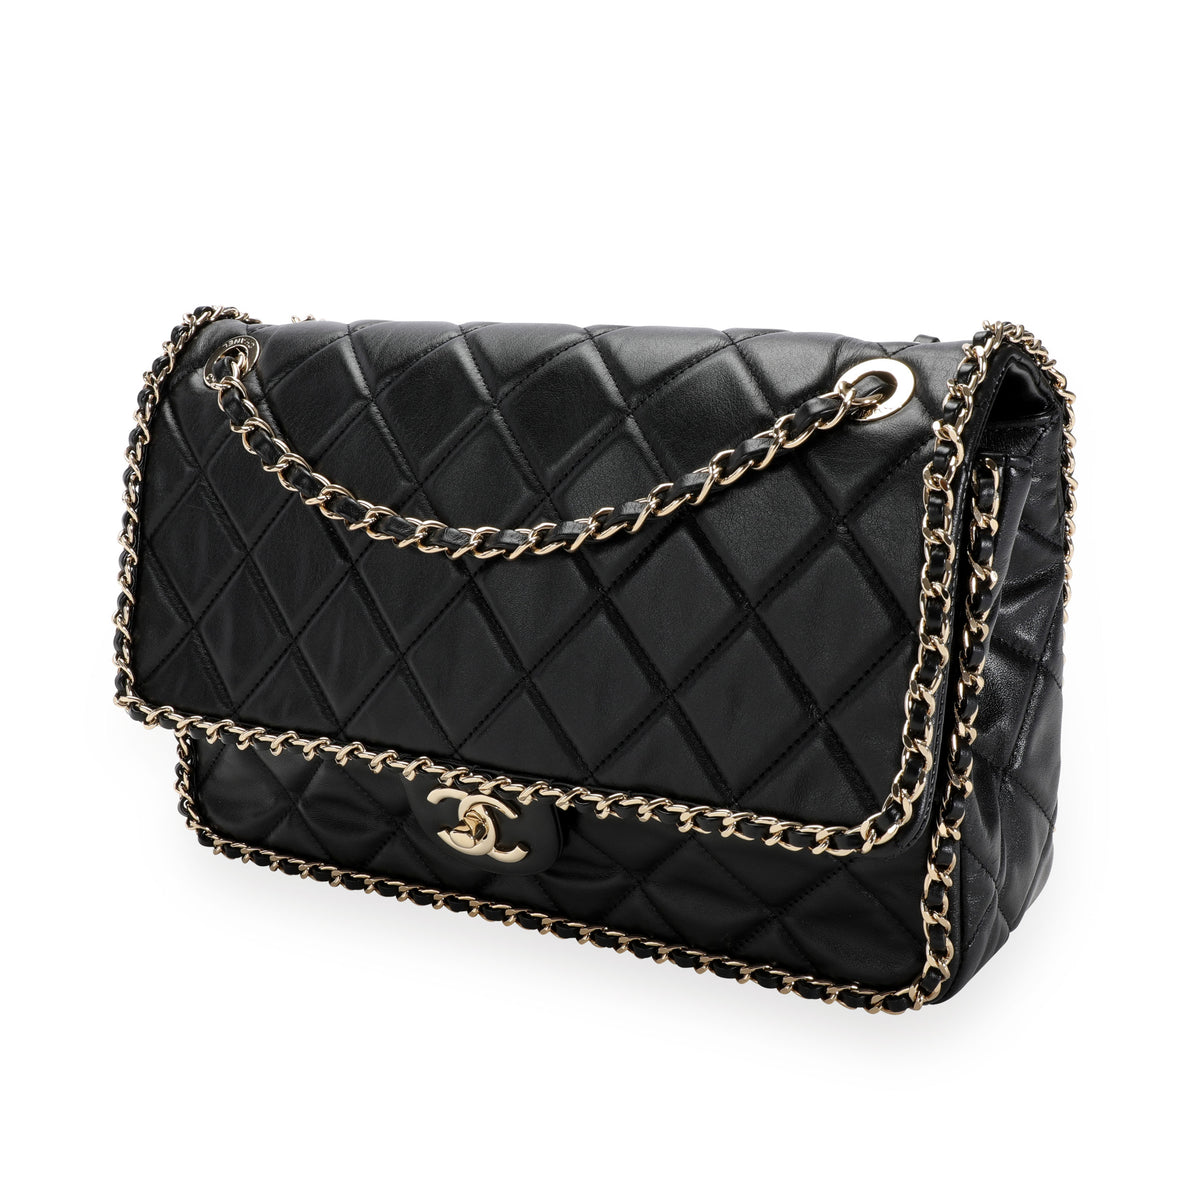 Chanel Black Quilted Lambskin Running Chain Flap Bag, myGemma